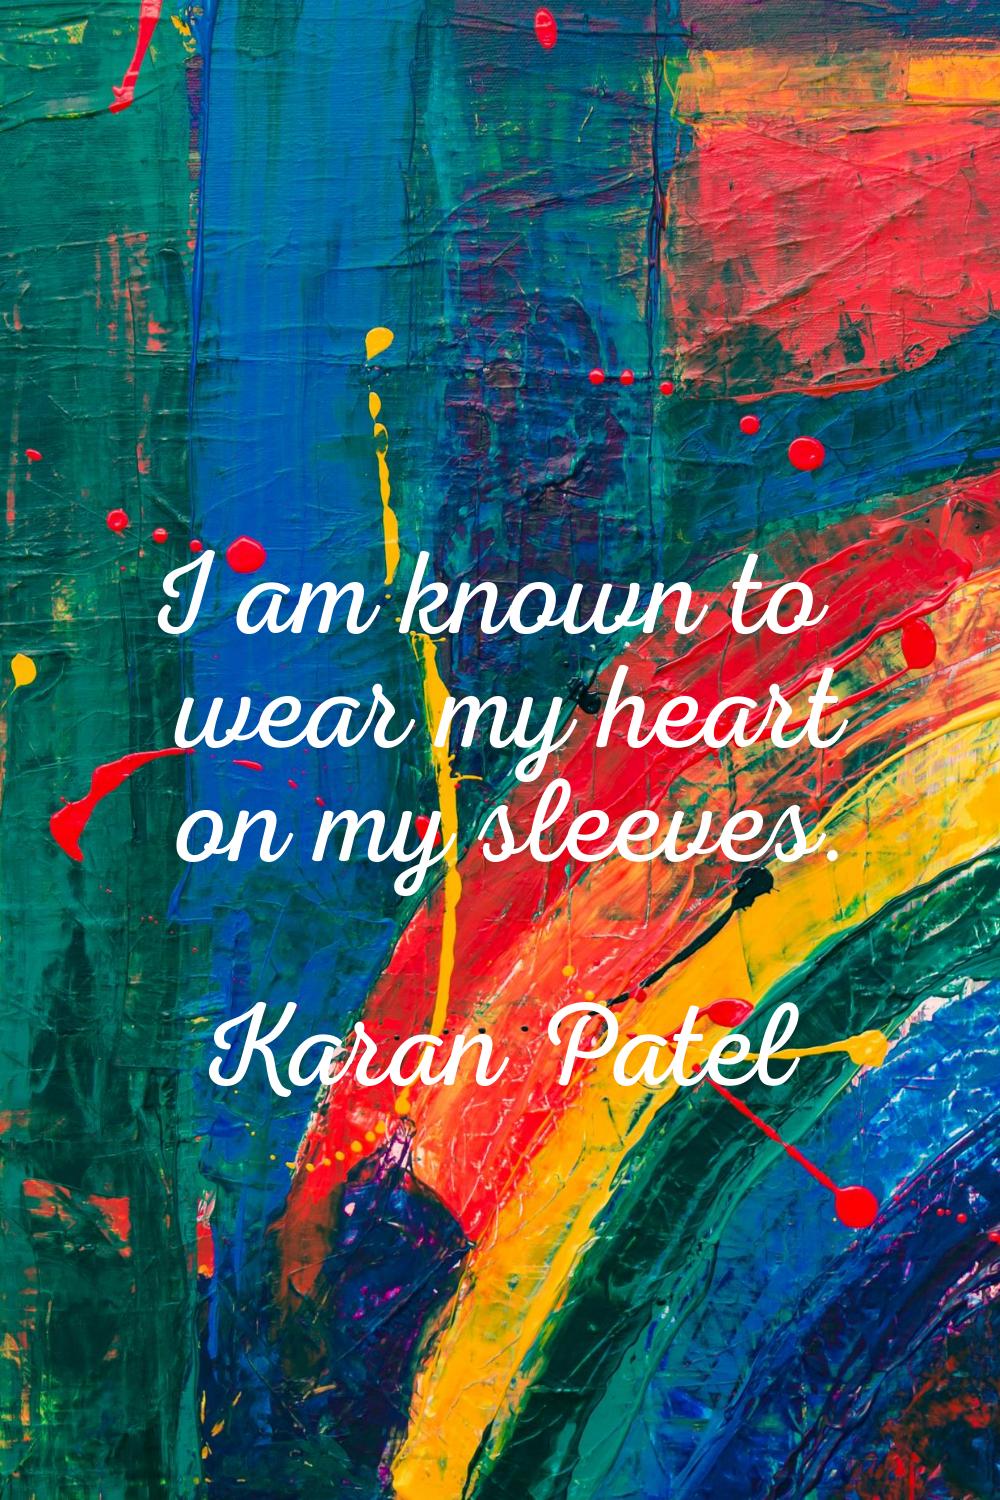 I am known to wear my heart on my sleeves.